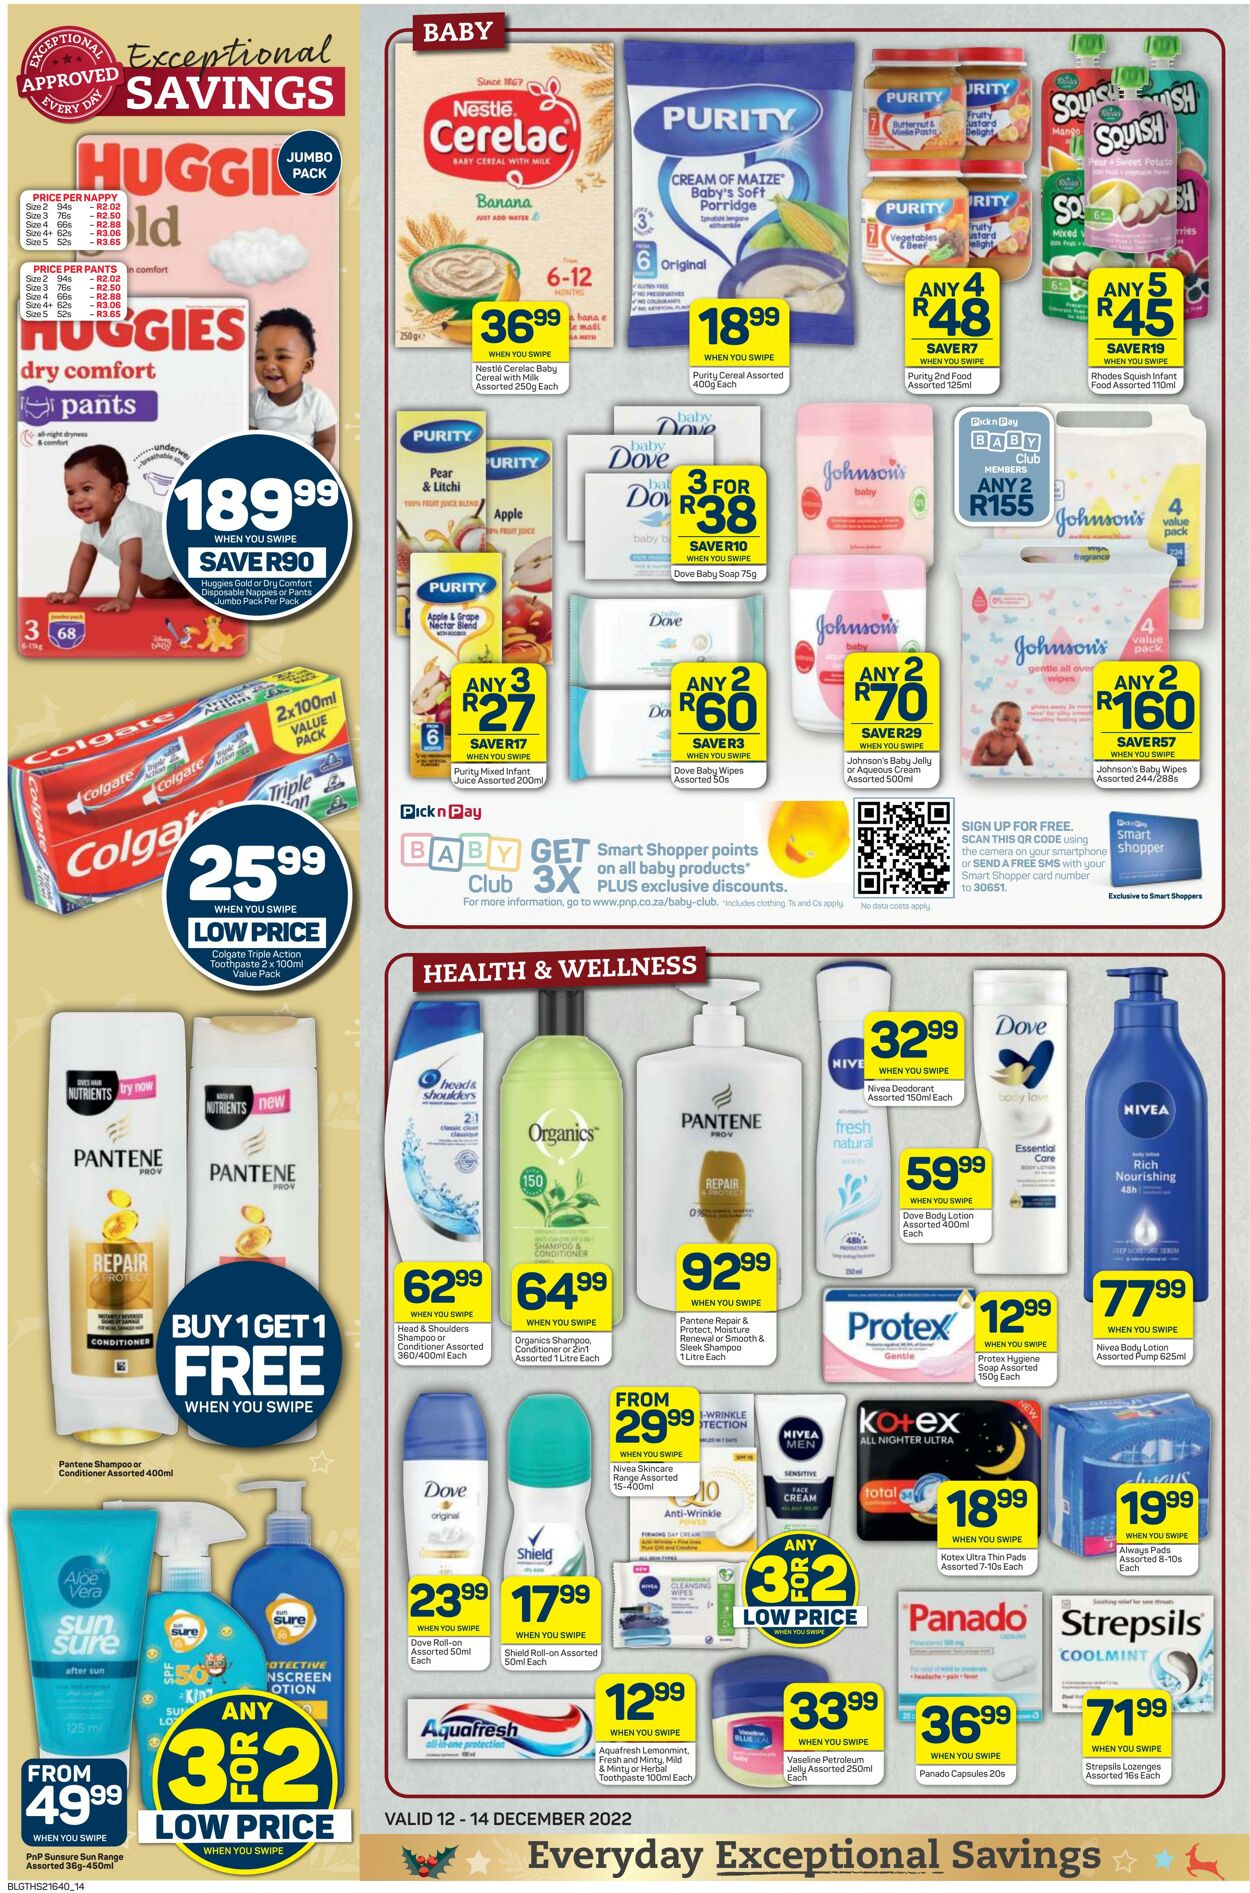 Special Pick n Pay 12.12.2022 - 14.12.2022